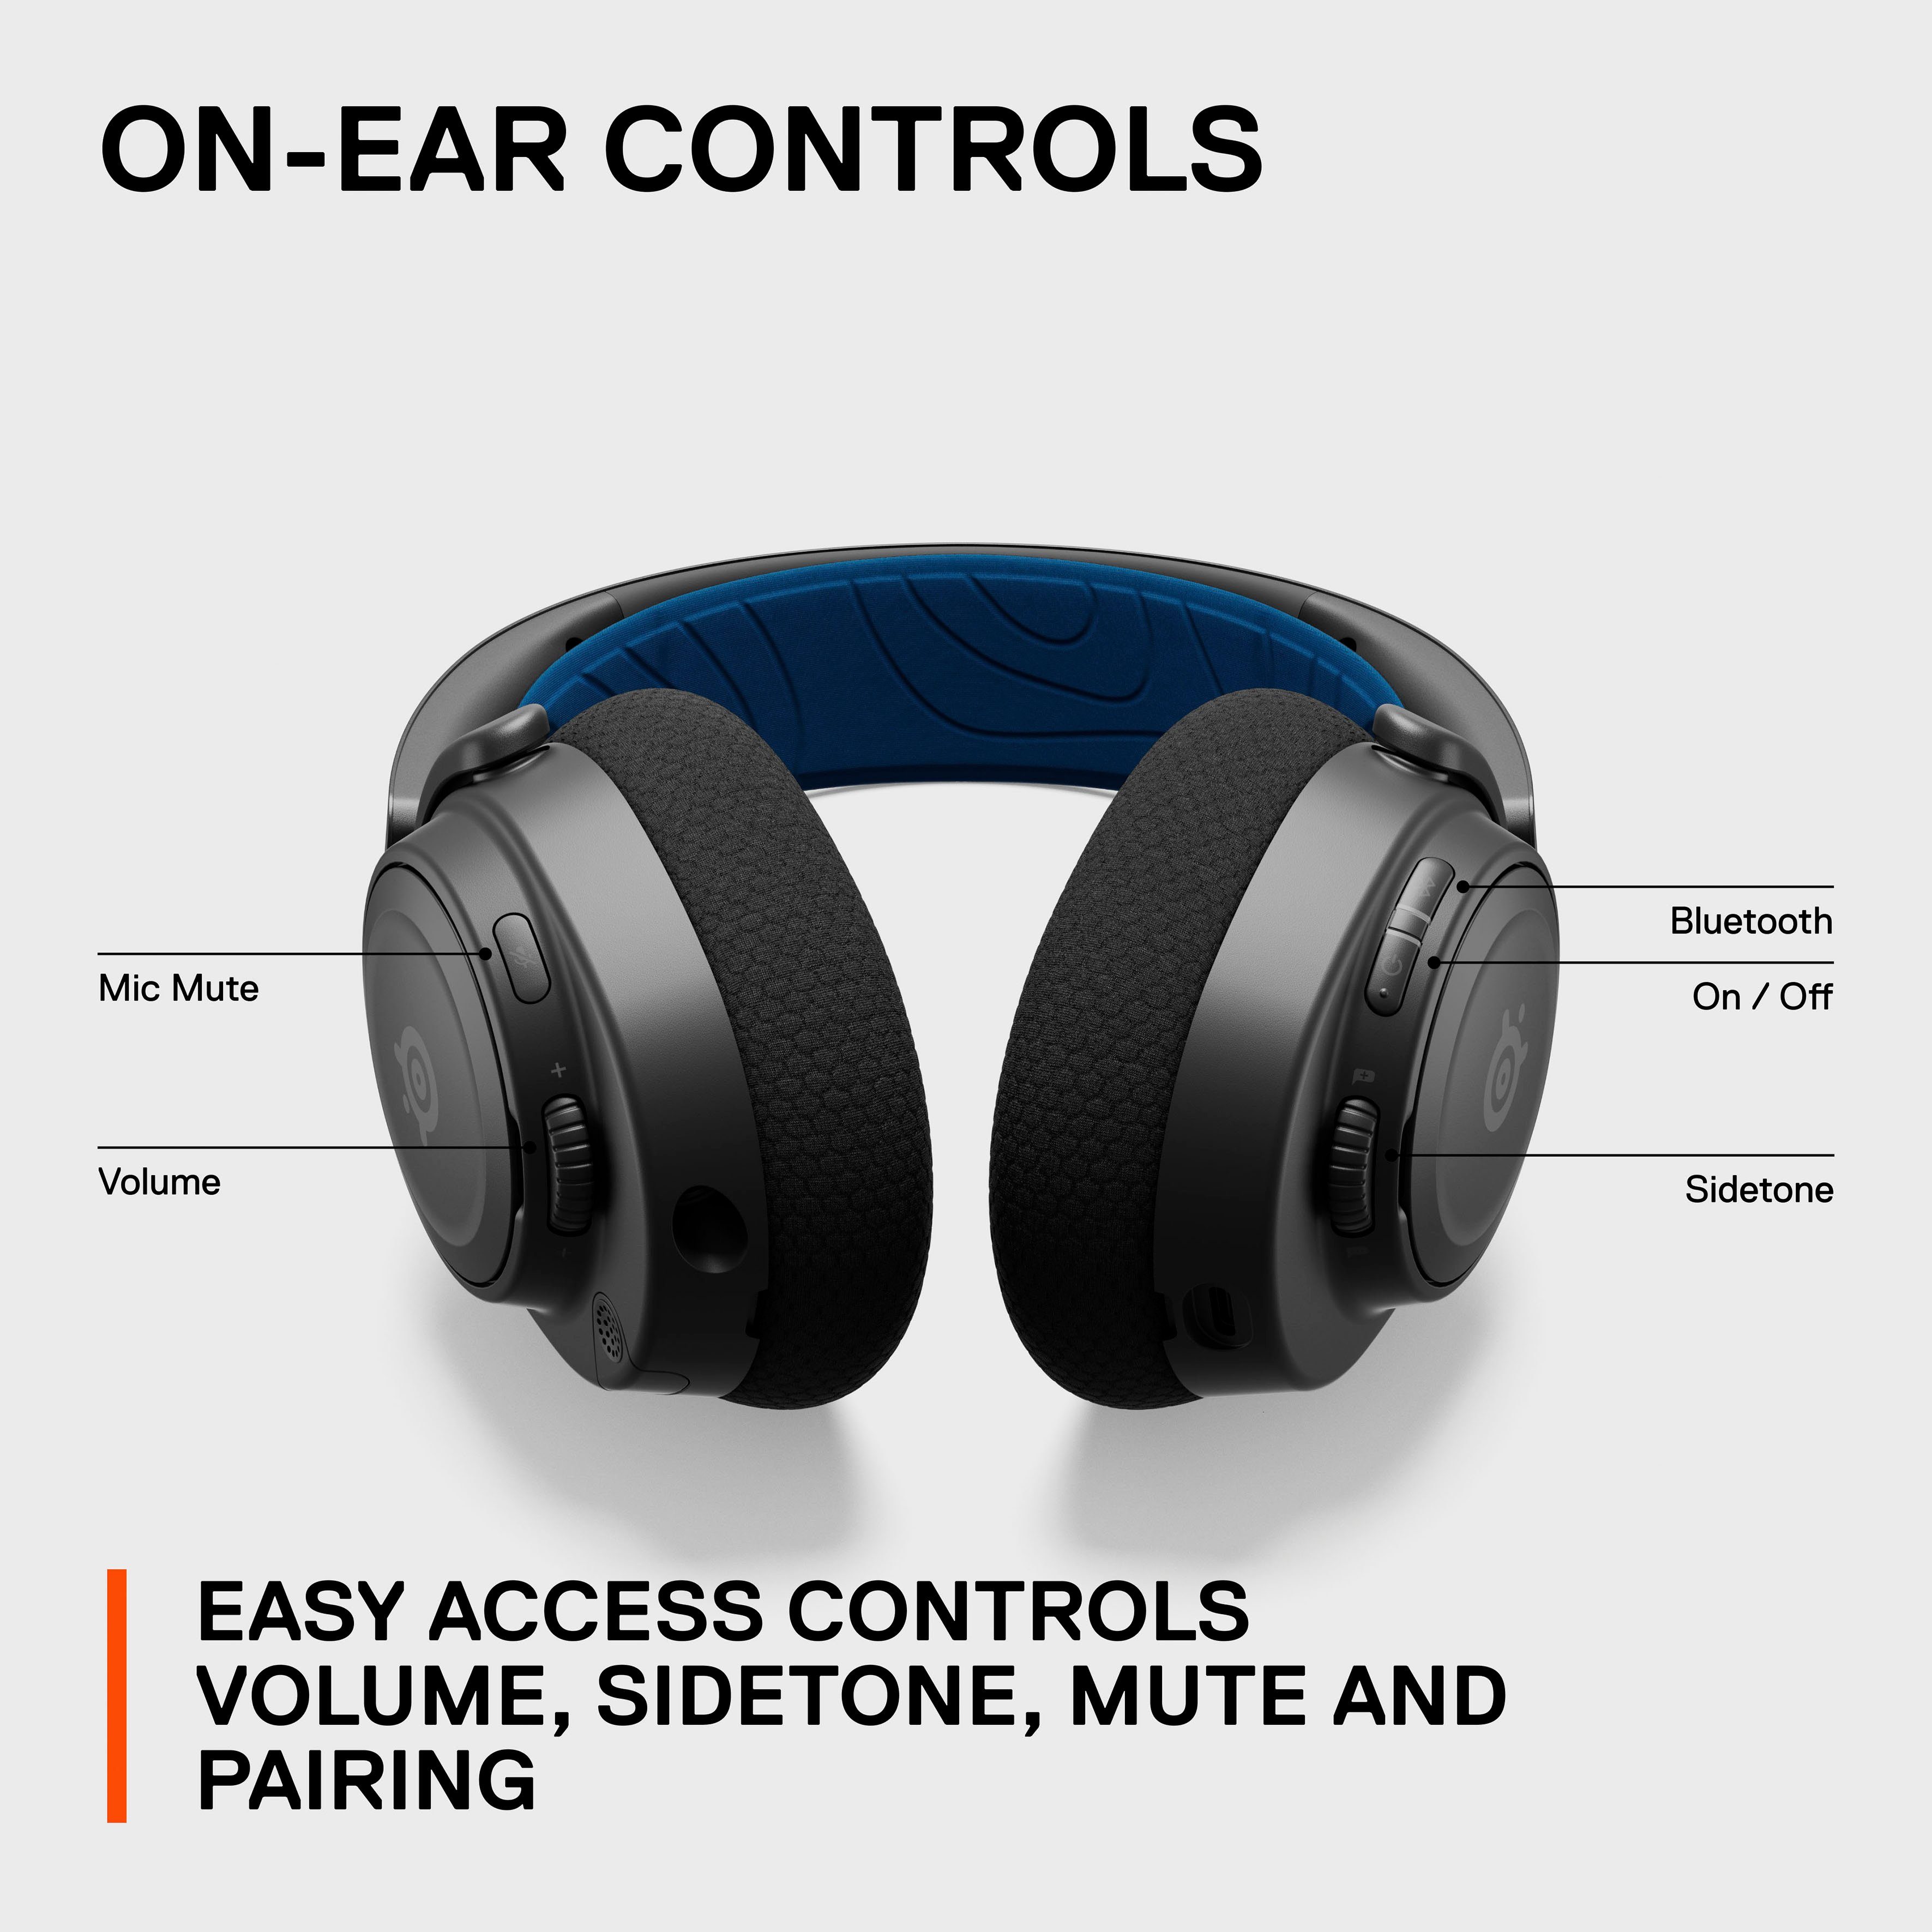 Gaming-Headset 7P (Noise-Cancelling, Nova Wireless) Bluetooth, Arctis SteelSeries